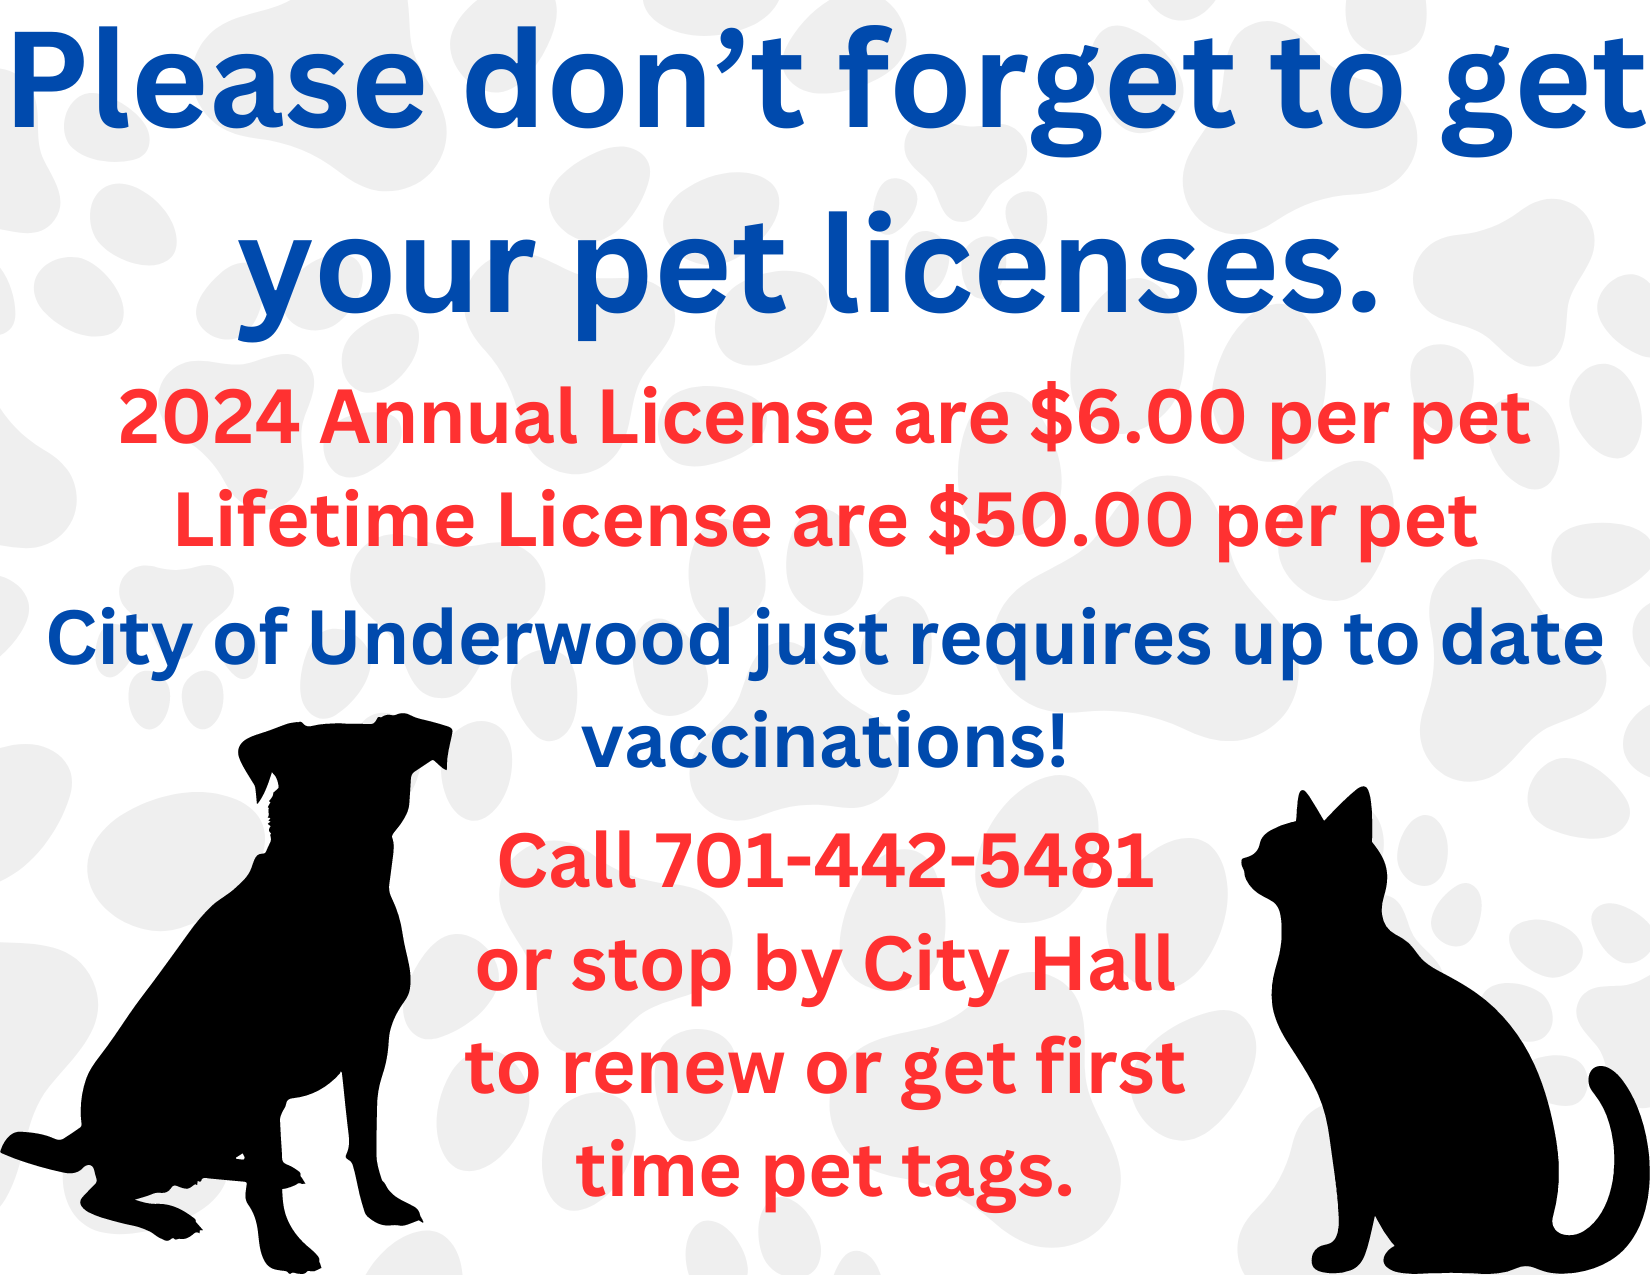 Please don’t forget to get your pet licenses..png